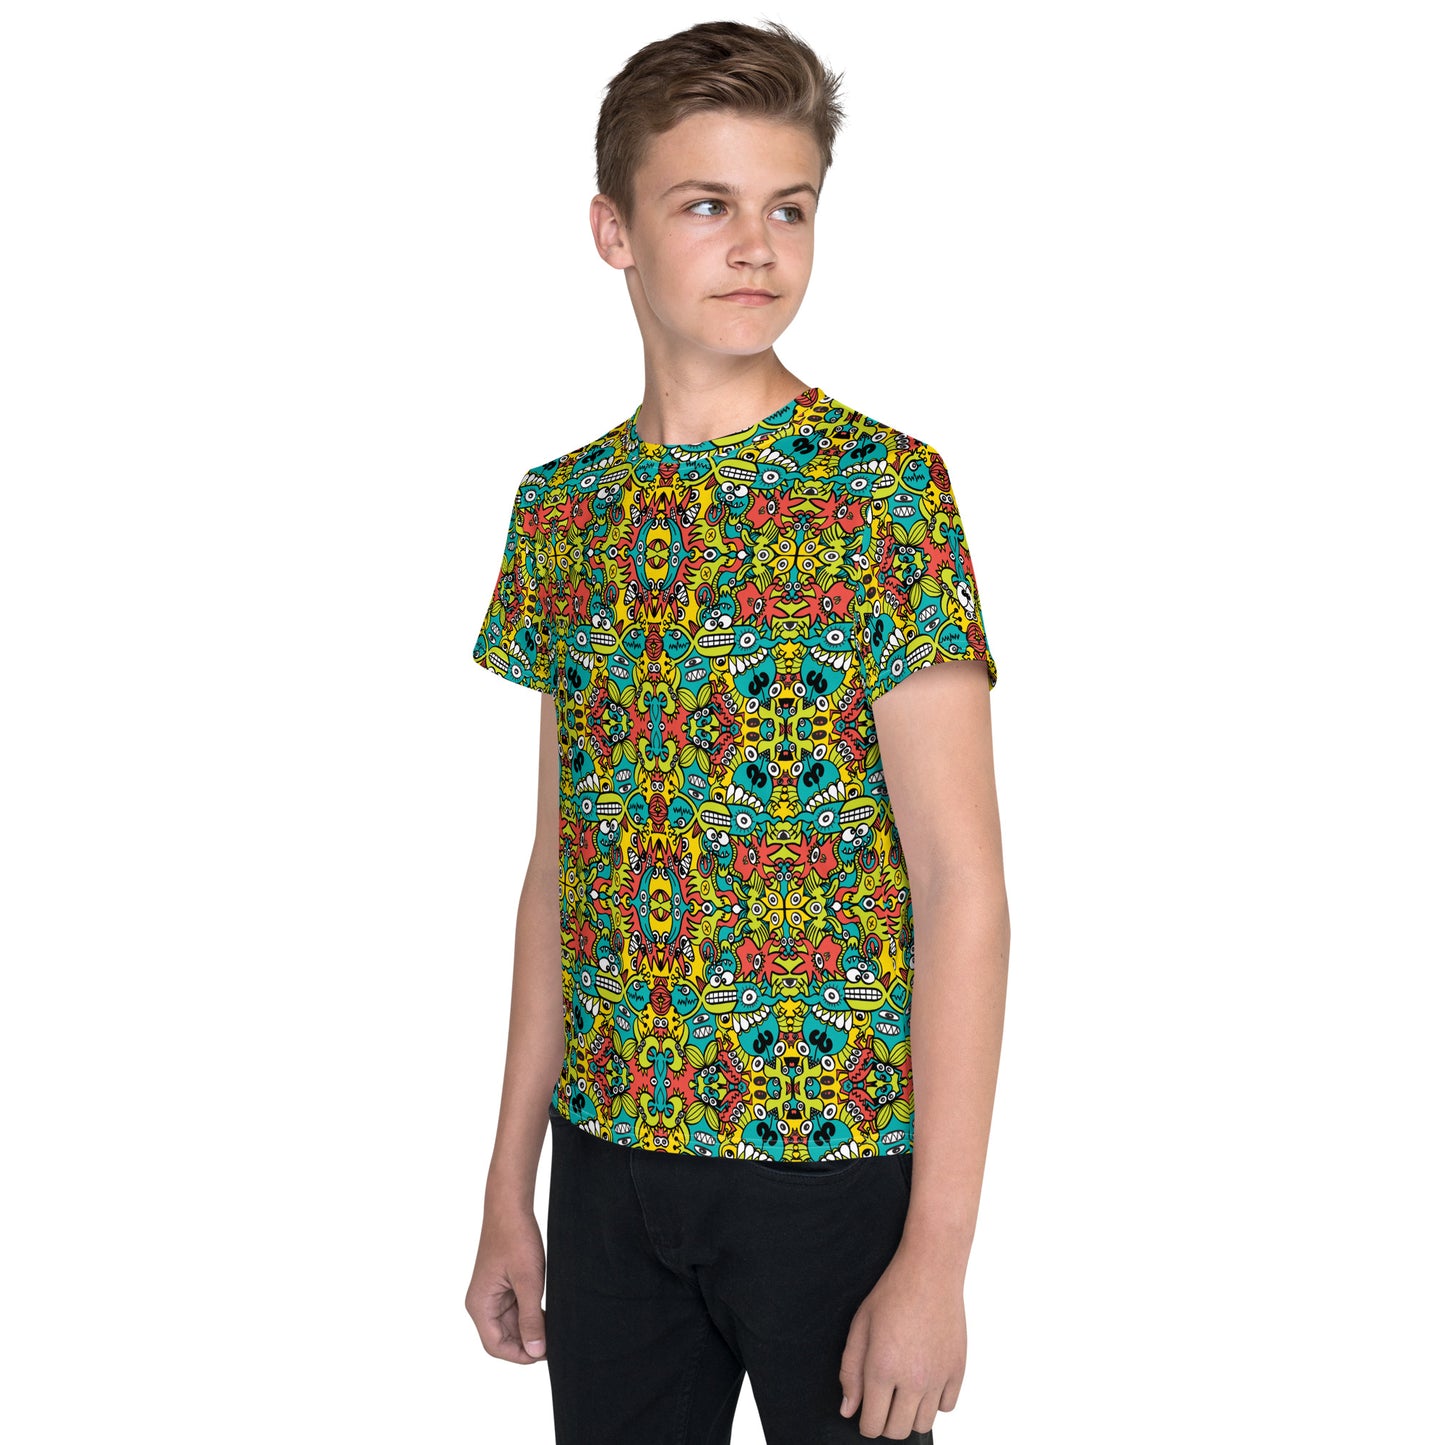 Doodle Dreamscape: Cosmic Critter Carnival - Youth crew neck t-shirt. Side view